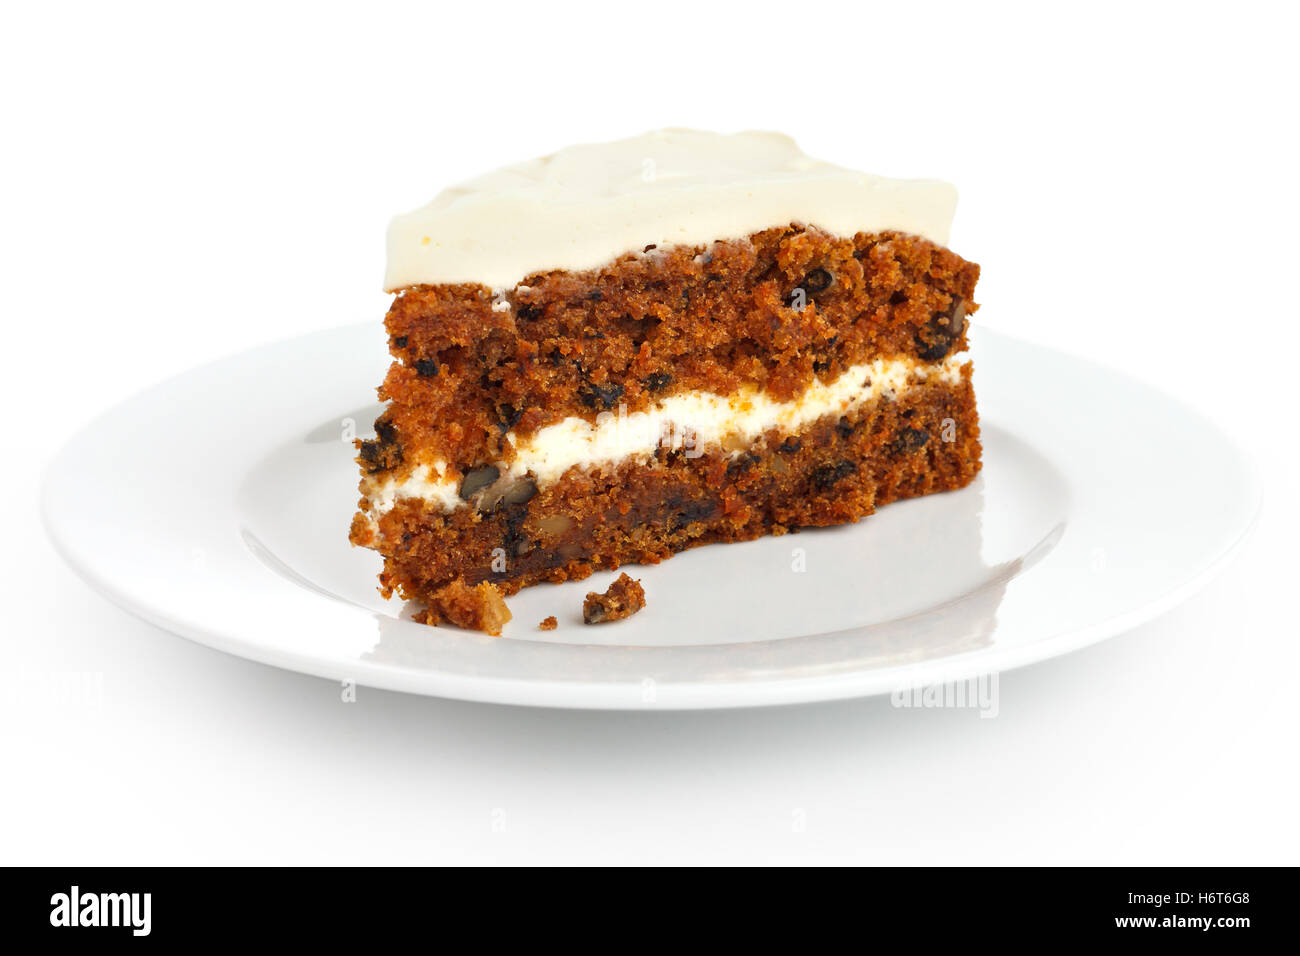 Slice of carrot cake with rich frosting. On plate. Stock Photo